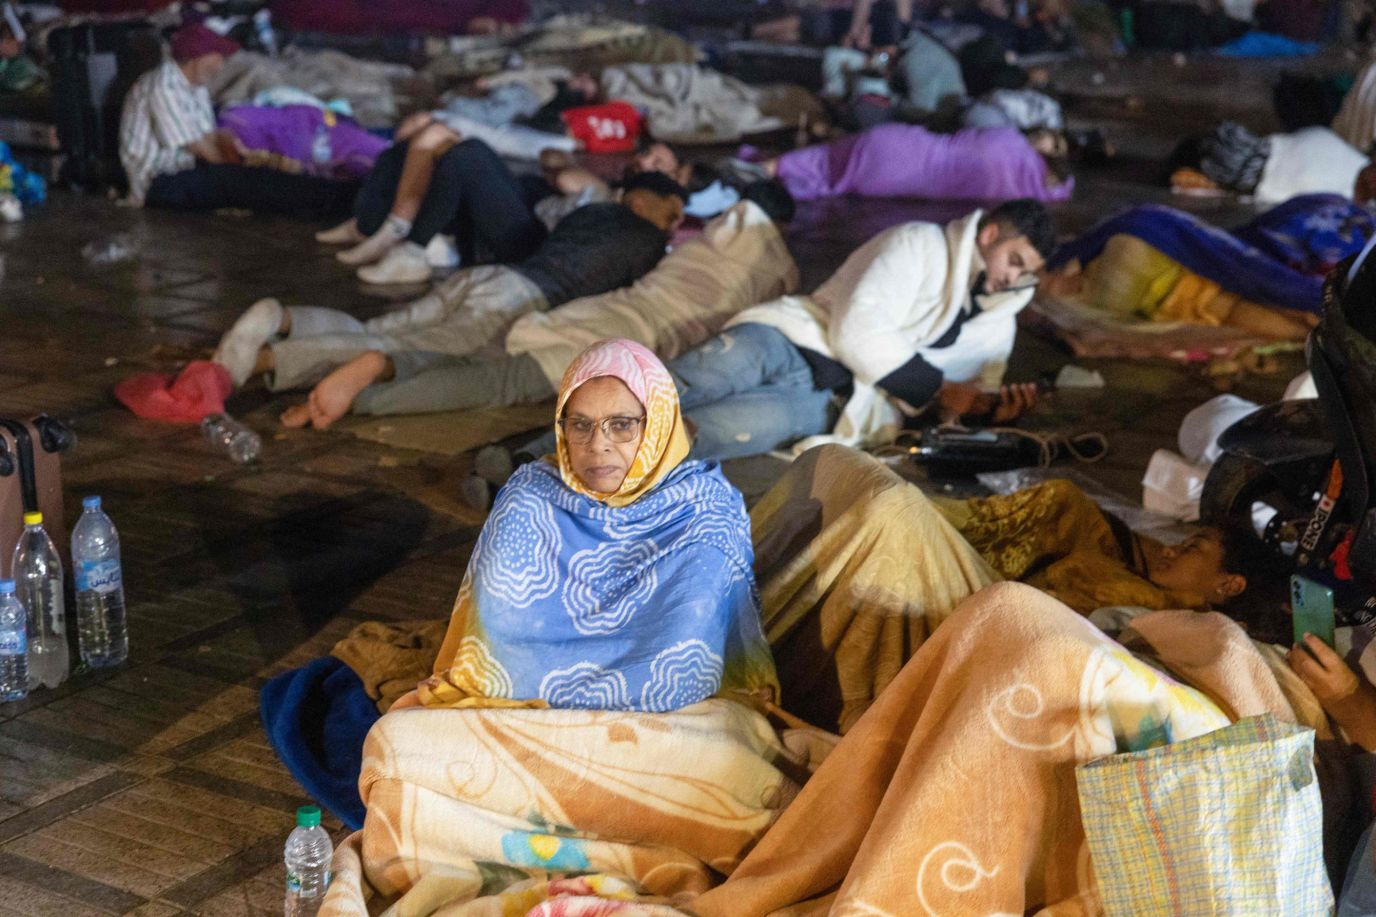 Residents take shelter outside following the earthquake in Marrakech, Morocco on September 9. 